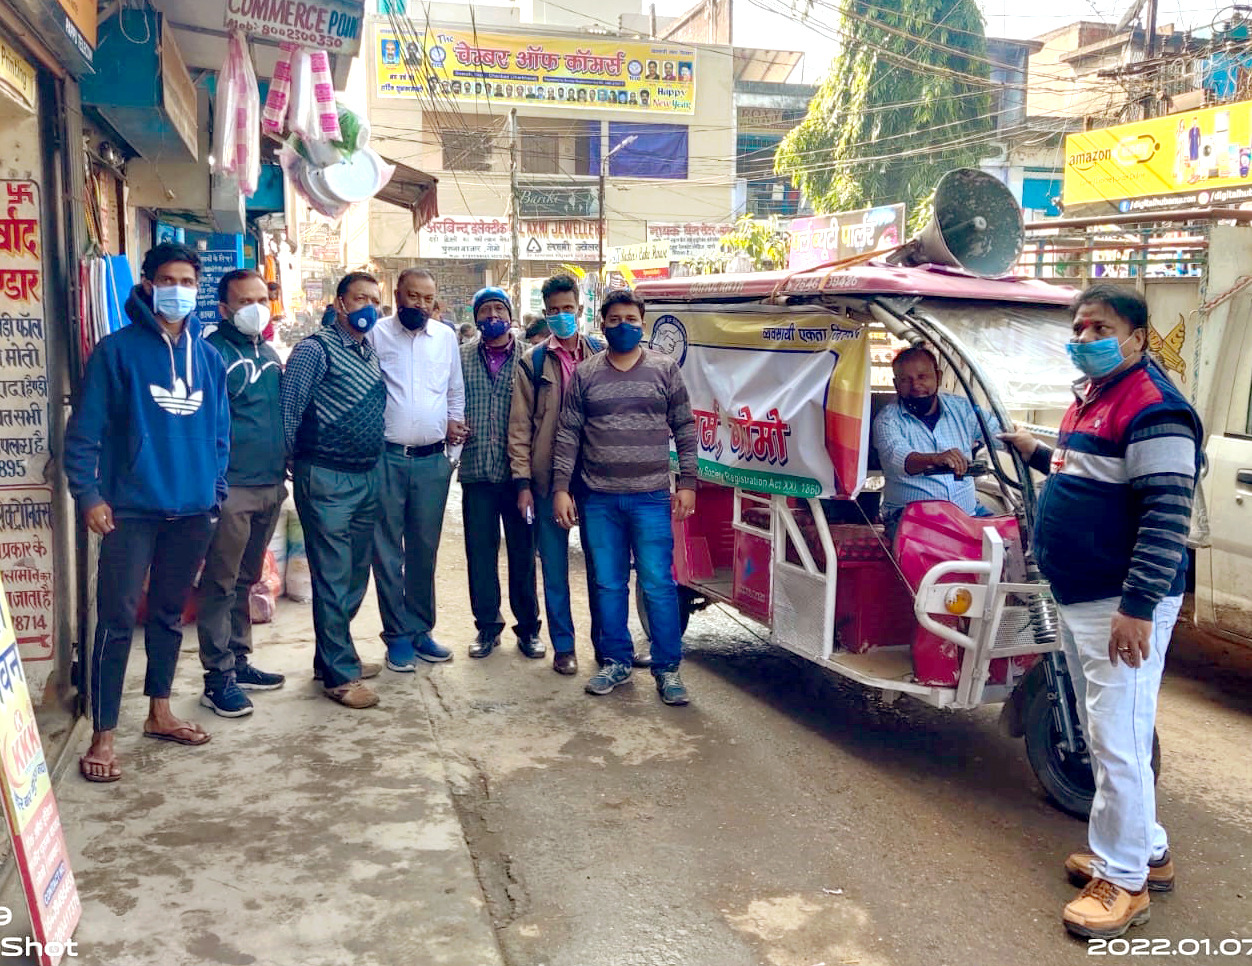 chamber of commerce begin a awareness campaign among traders about the mask